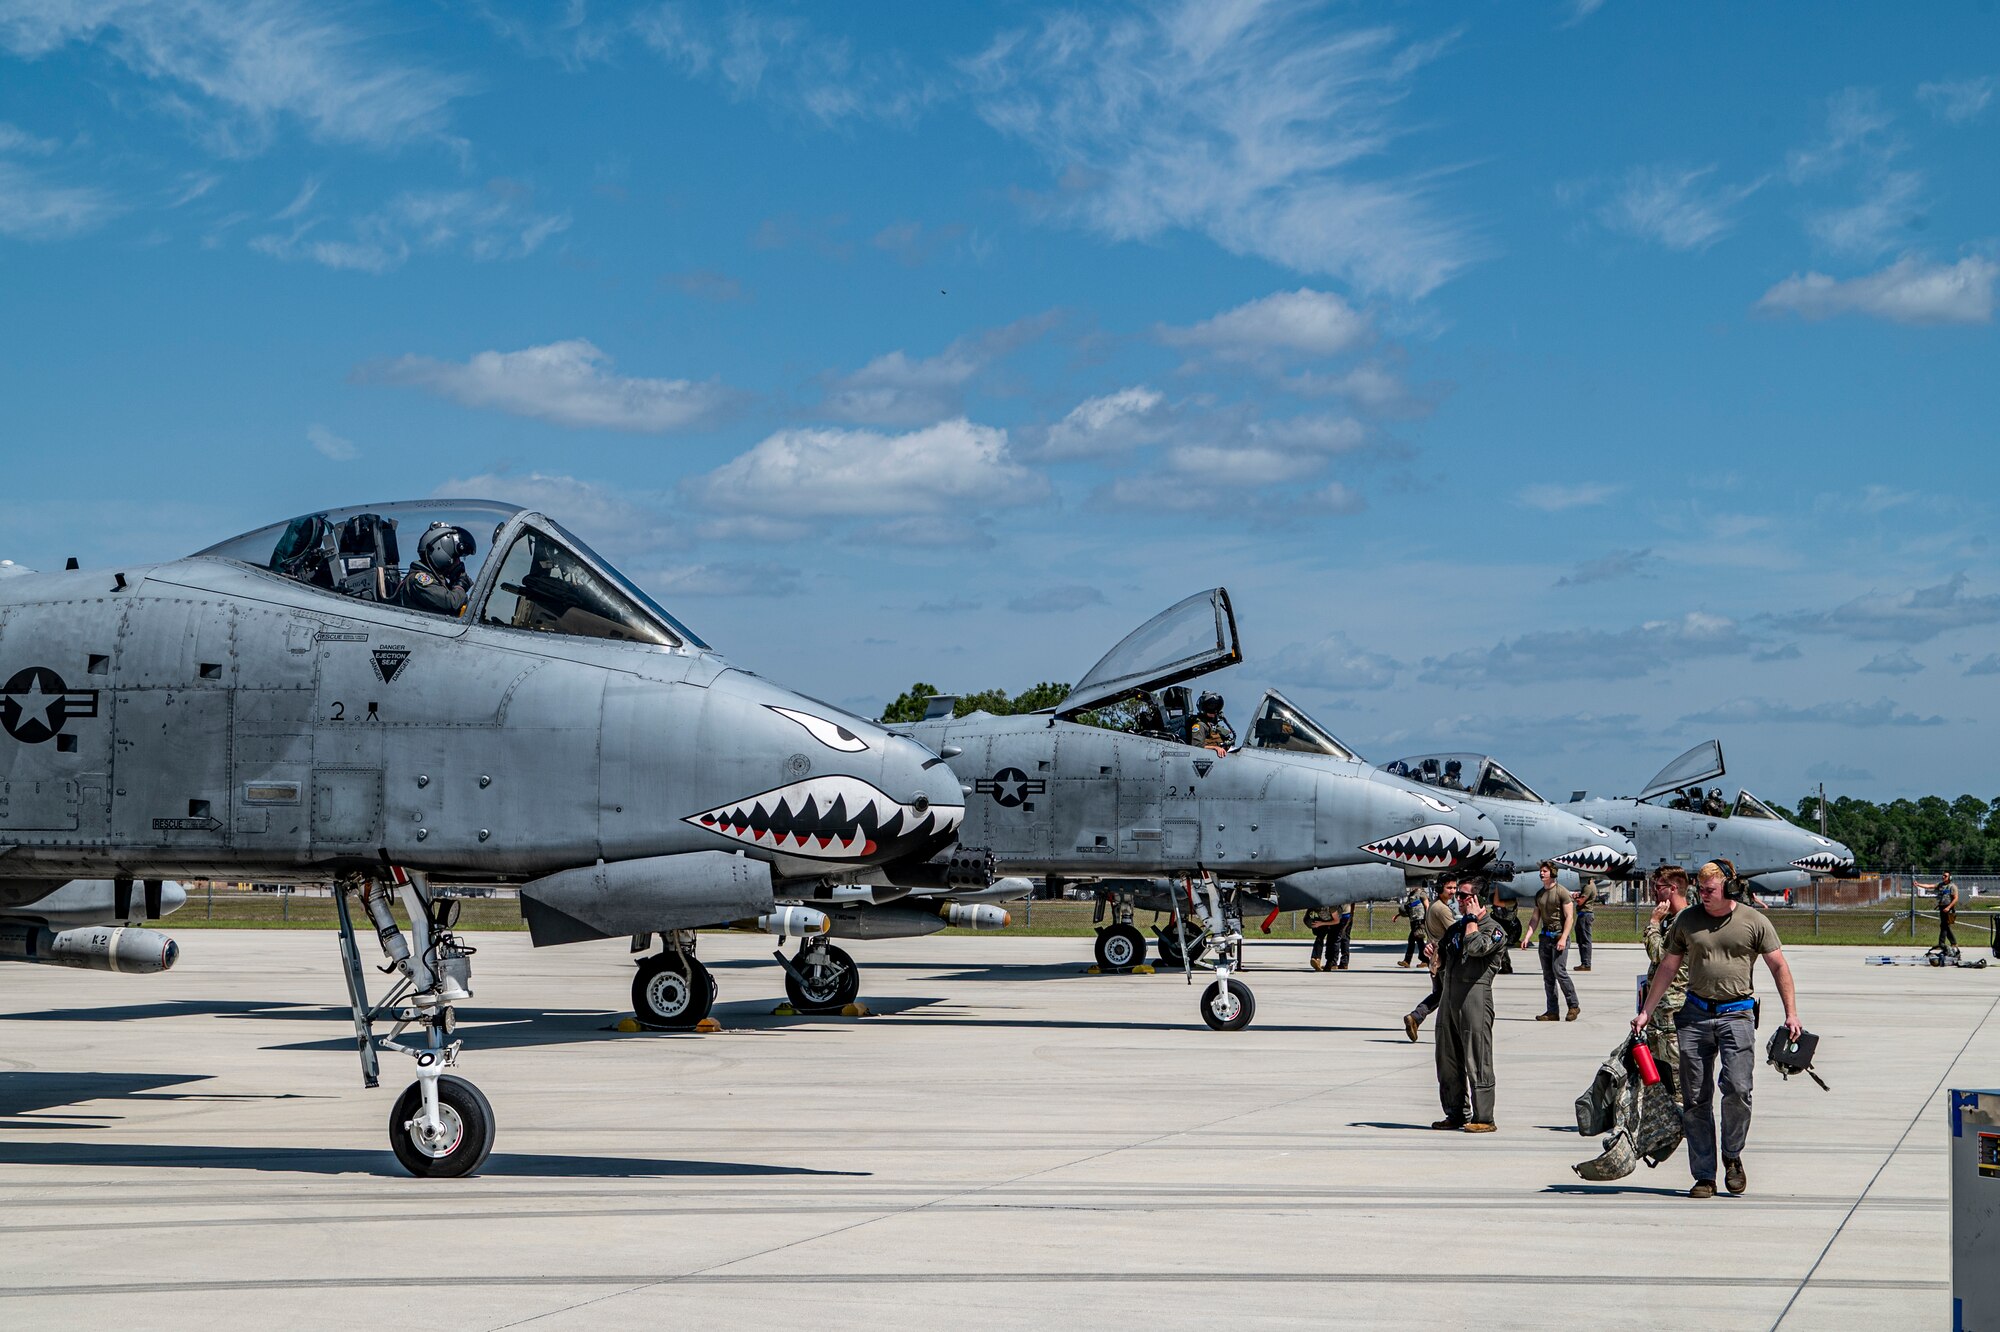 A-10C Thunderbolt II aircraft assigned to the 74th Fighter Squadron arrive for Exercise Ready Tiger 24-1 at Avon Park Air Force Range, Florida, April 10, 2024. The ability to generate air power from a remote contingency location on short notice is crucial in the future of the Air Force mission. During Ready Tiger 24-1, the 23rd Wing will be evaluated on the integration of Air Force Force Generation principles such as Agile Combat Employment, integrated combat turns, forward aerial refueling points, multi-capable Airmen, and combat search and rescue capabilities. (U.S. Air Force photo by Airman 1st Class Leonid Soubbotine)